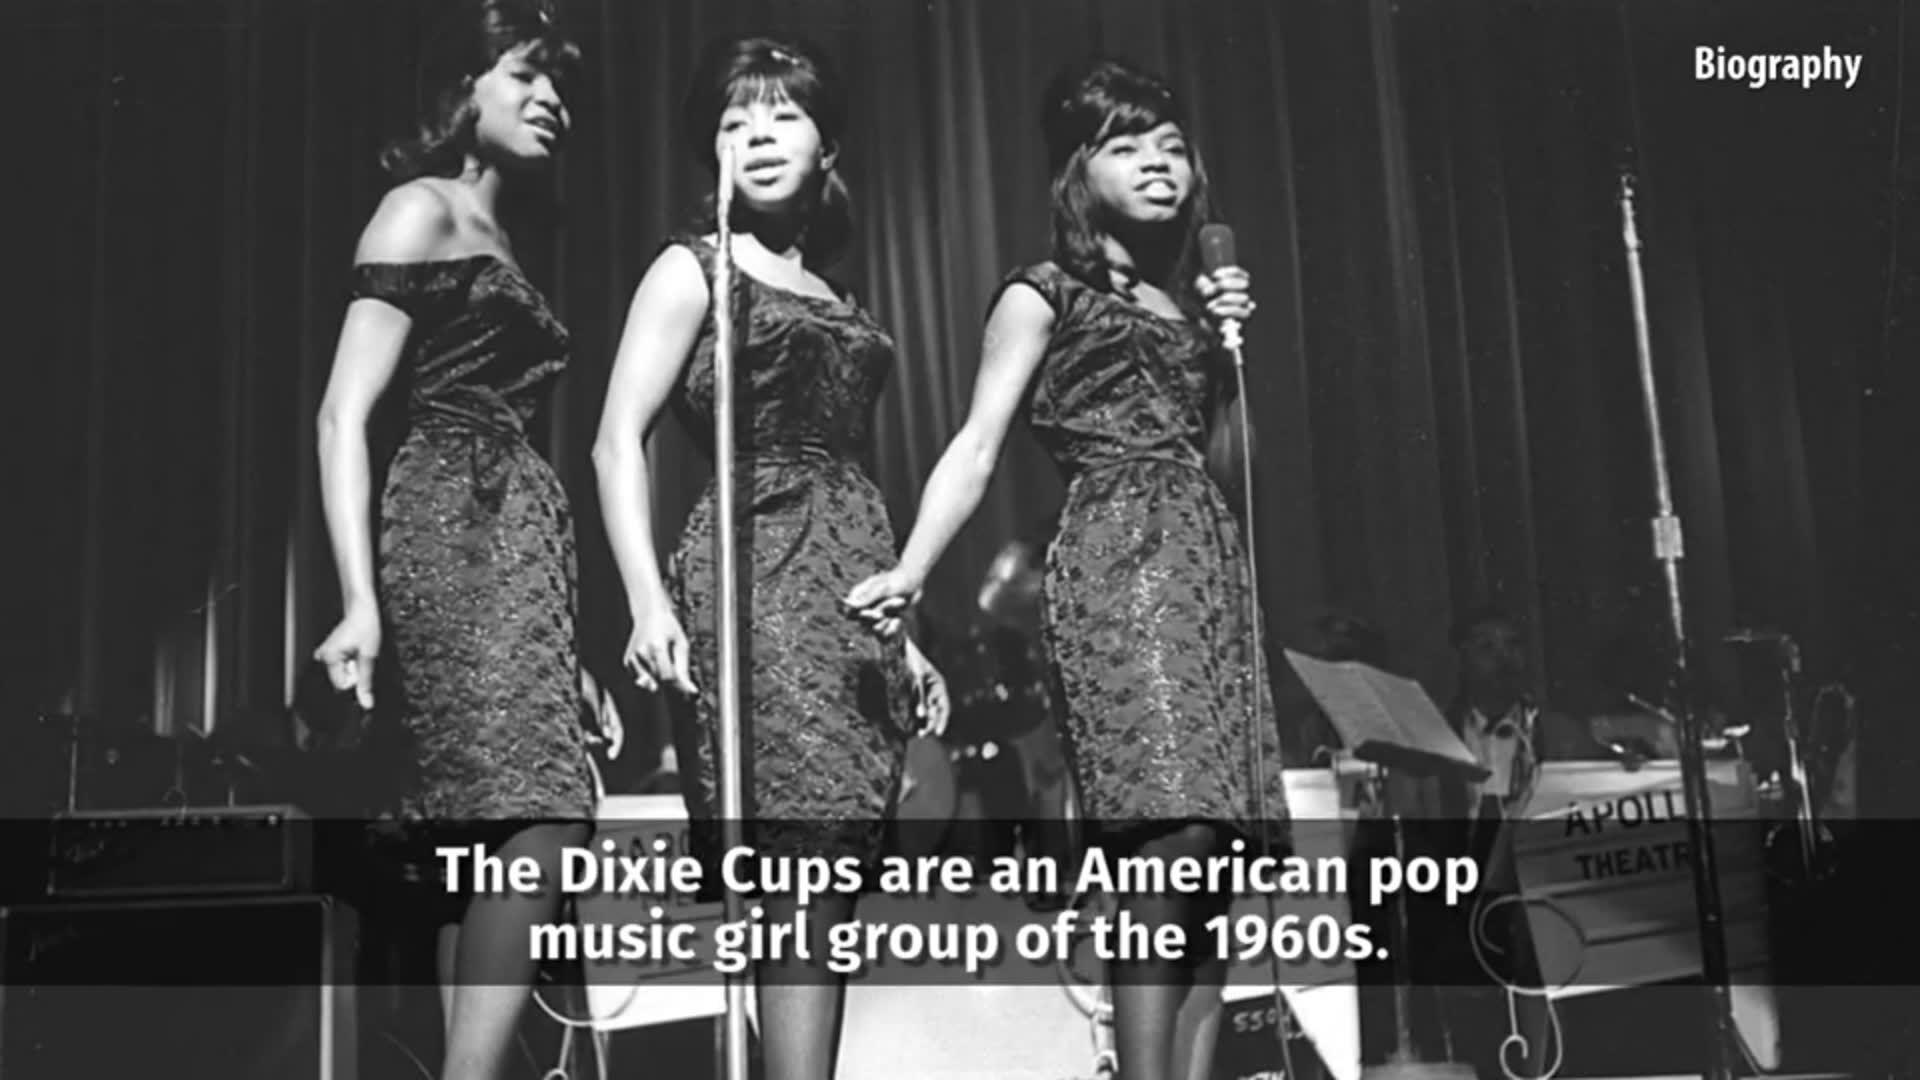 Rosa Lee Hawkins, Youngest Member of the Dixie Cups, Dies at 76